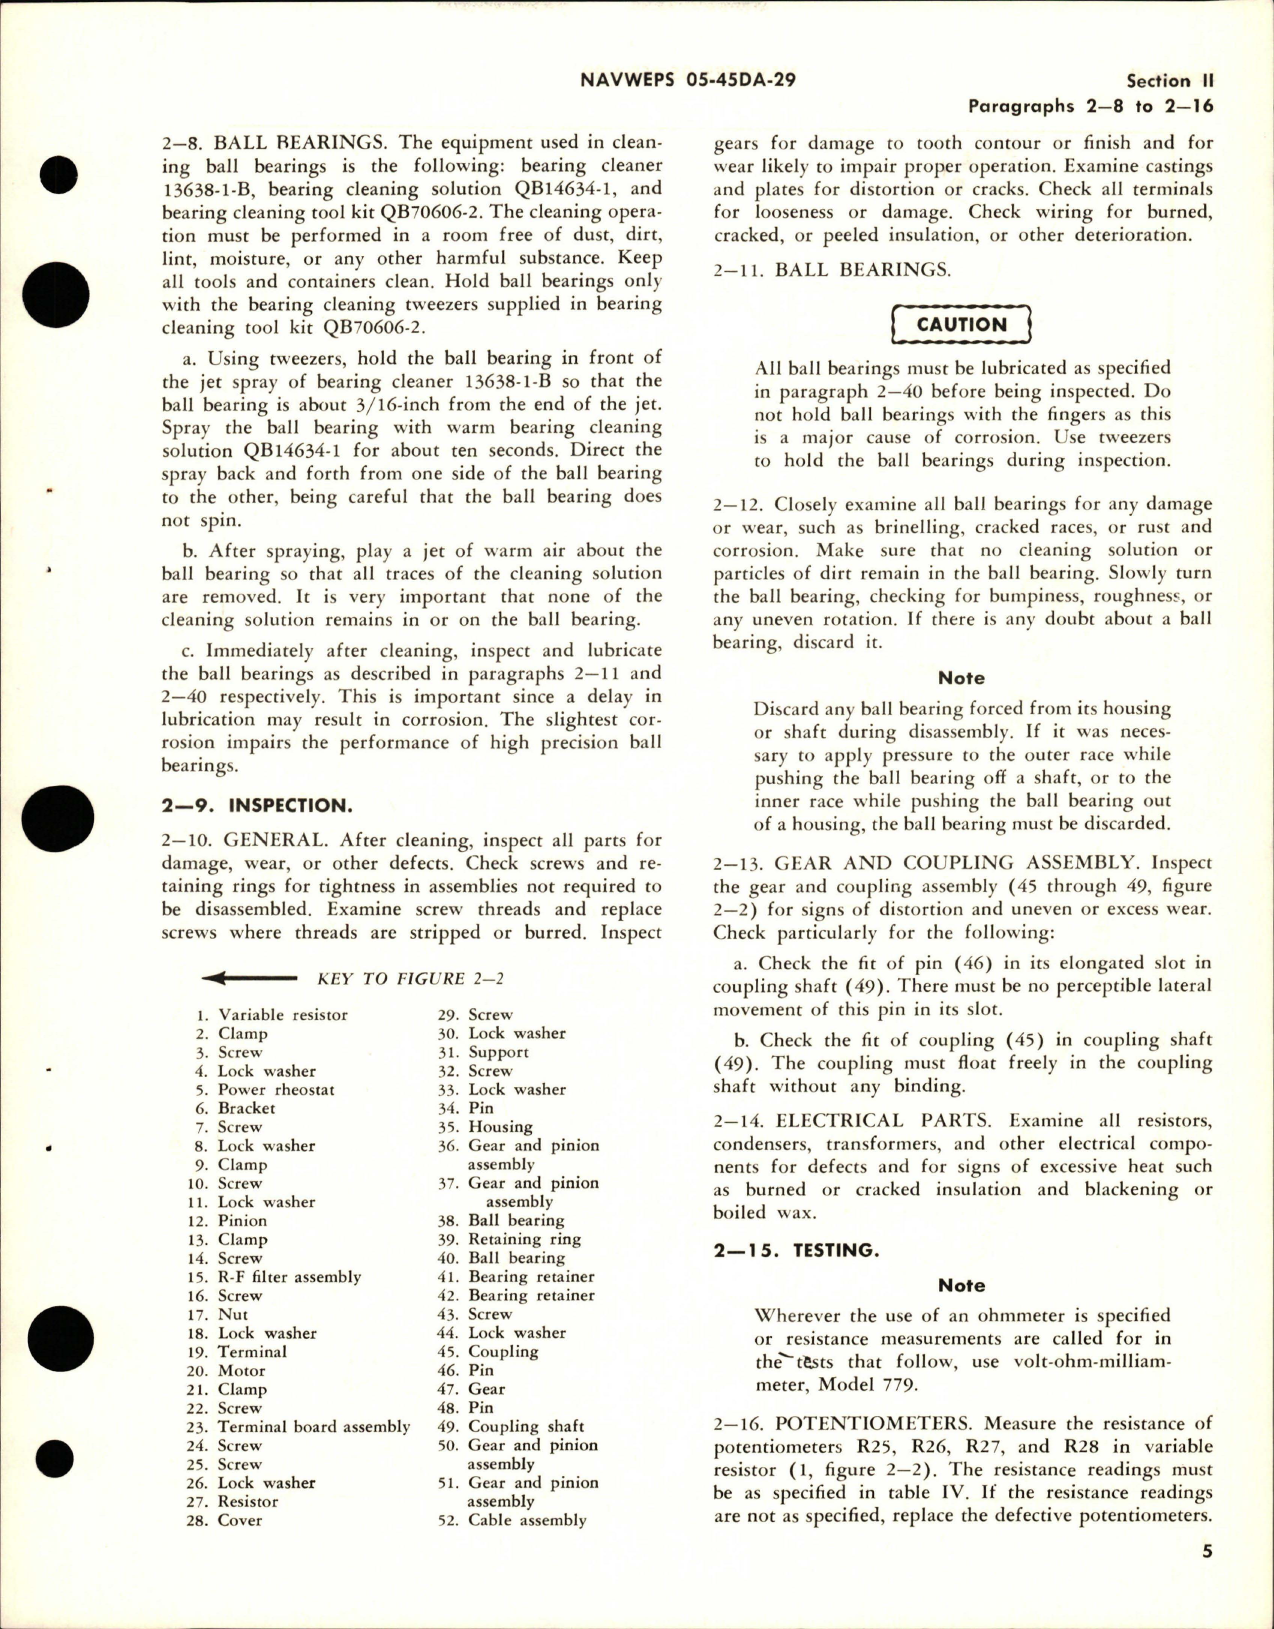 Sample page 9 from AirCorps Library document: Overhaul Instructions for Radio Remote Controller - Part 15740-1-A